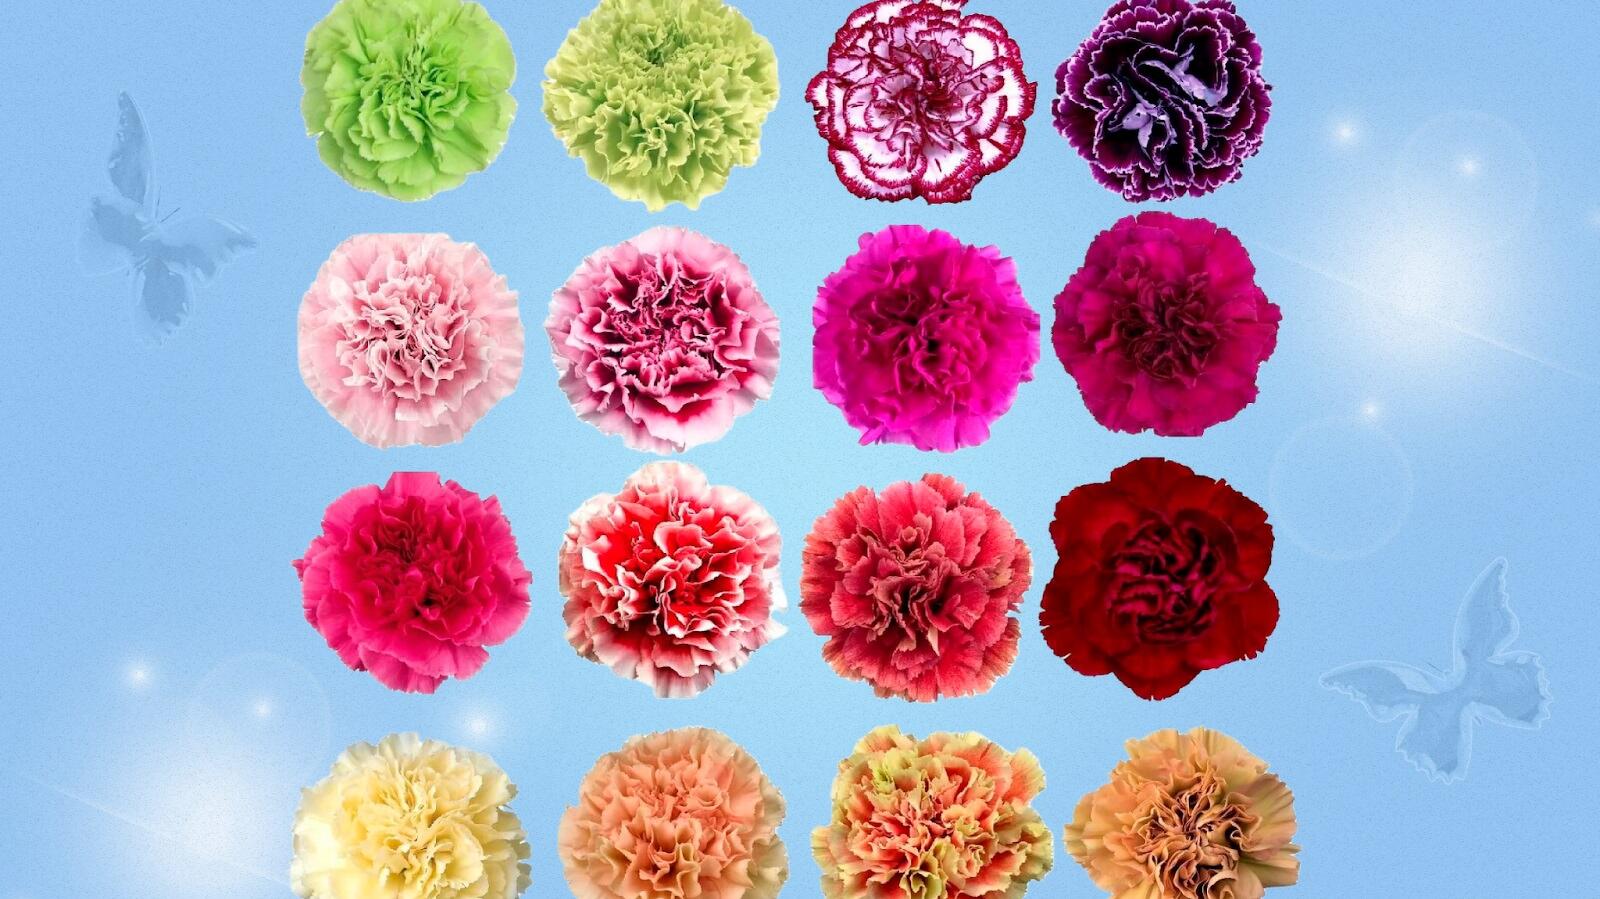 Carnation Flower Meaning by Colour